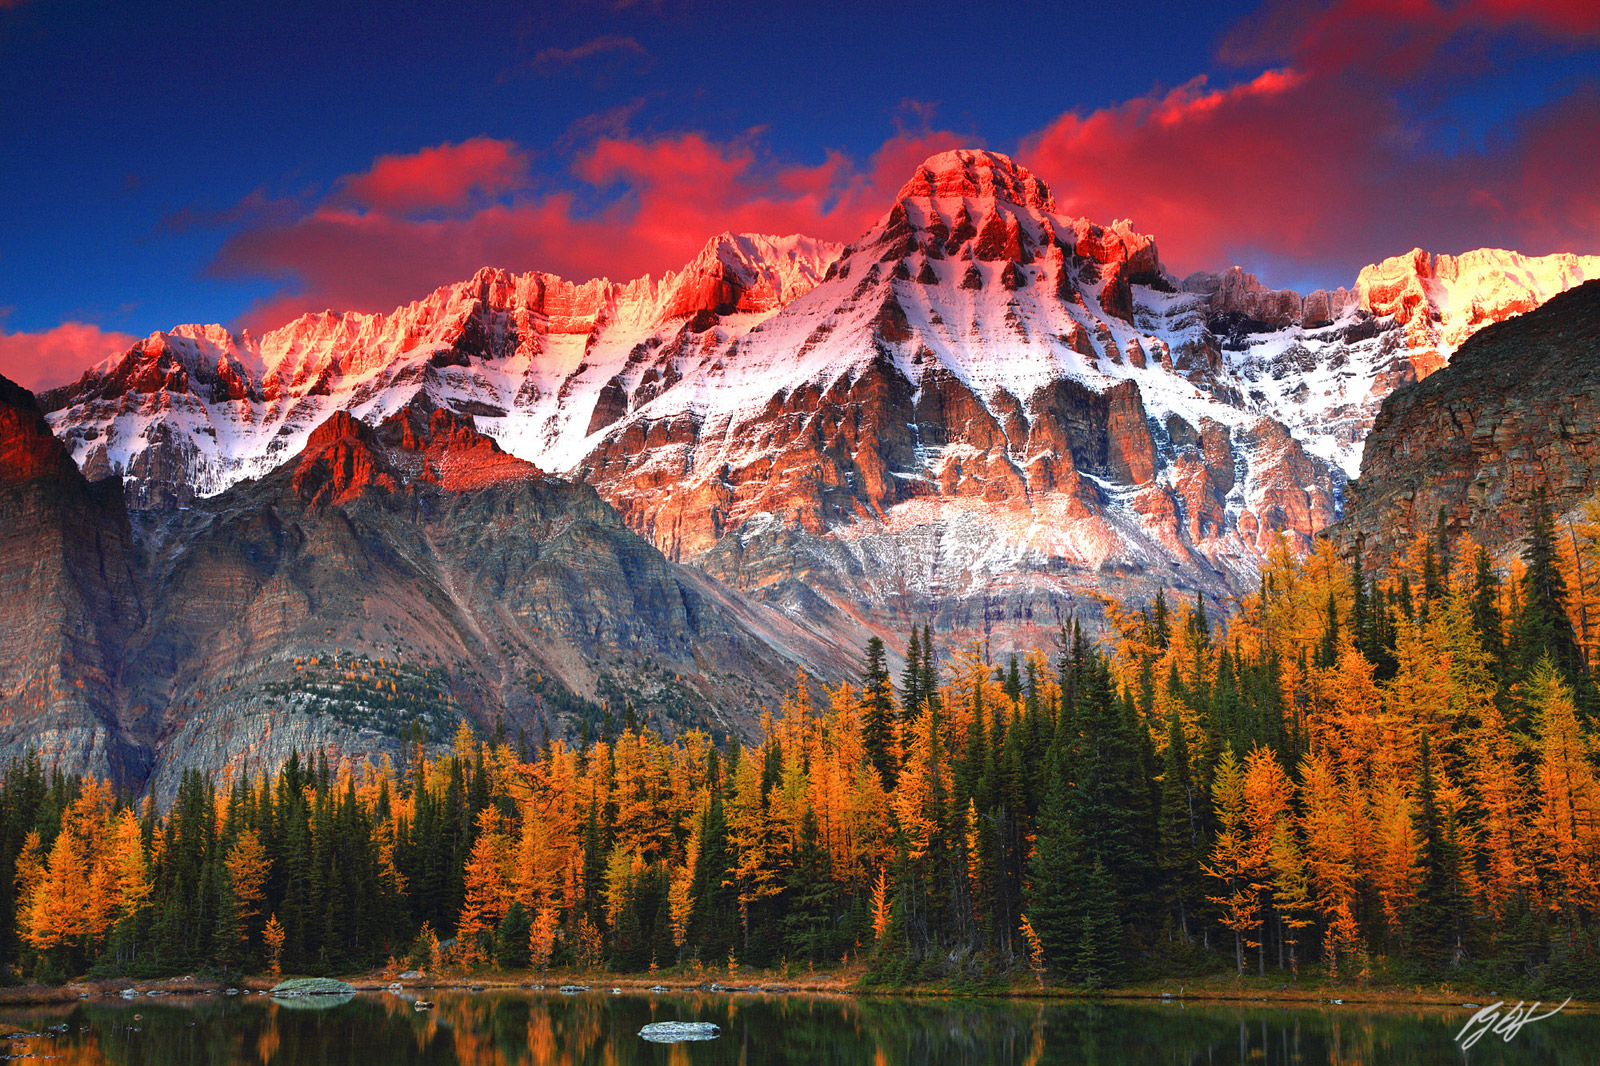 Sunset Golden Larch and Mt Huber in the Lake O'Hara Region of Yoho National Park in Canada